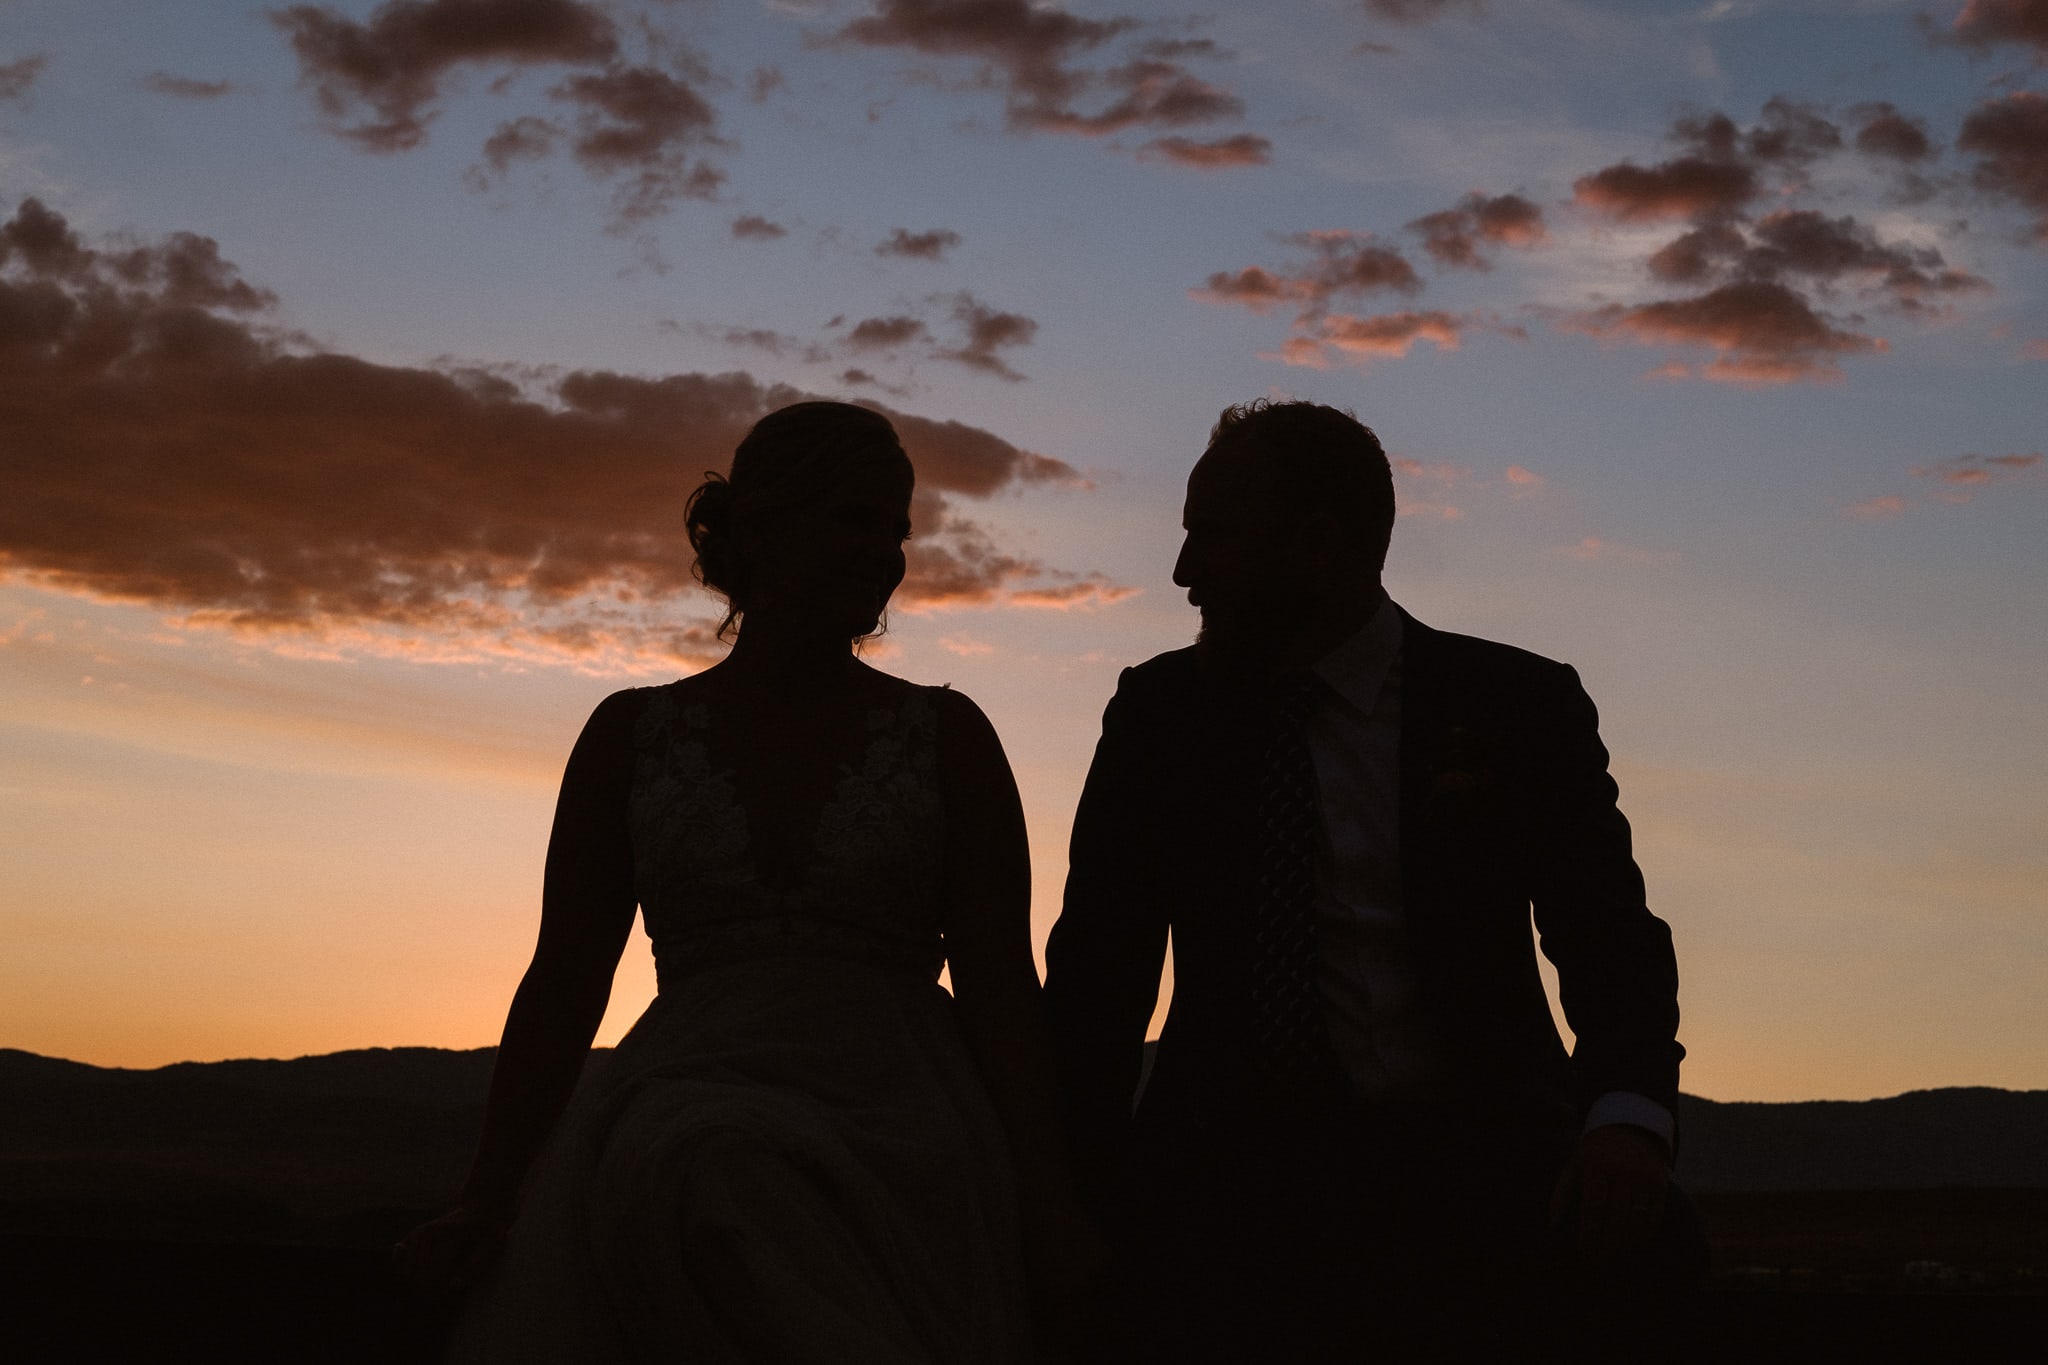 Steamboat Springs wedding photographer, La Joya Dulce wedding, Colorado ranch wedding venues, bride and groom portraits at sunset, bride and groom silhouettes at sunset